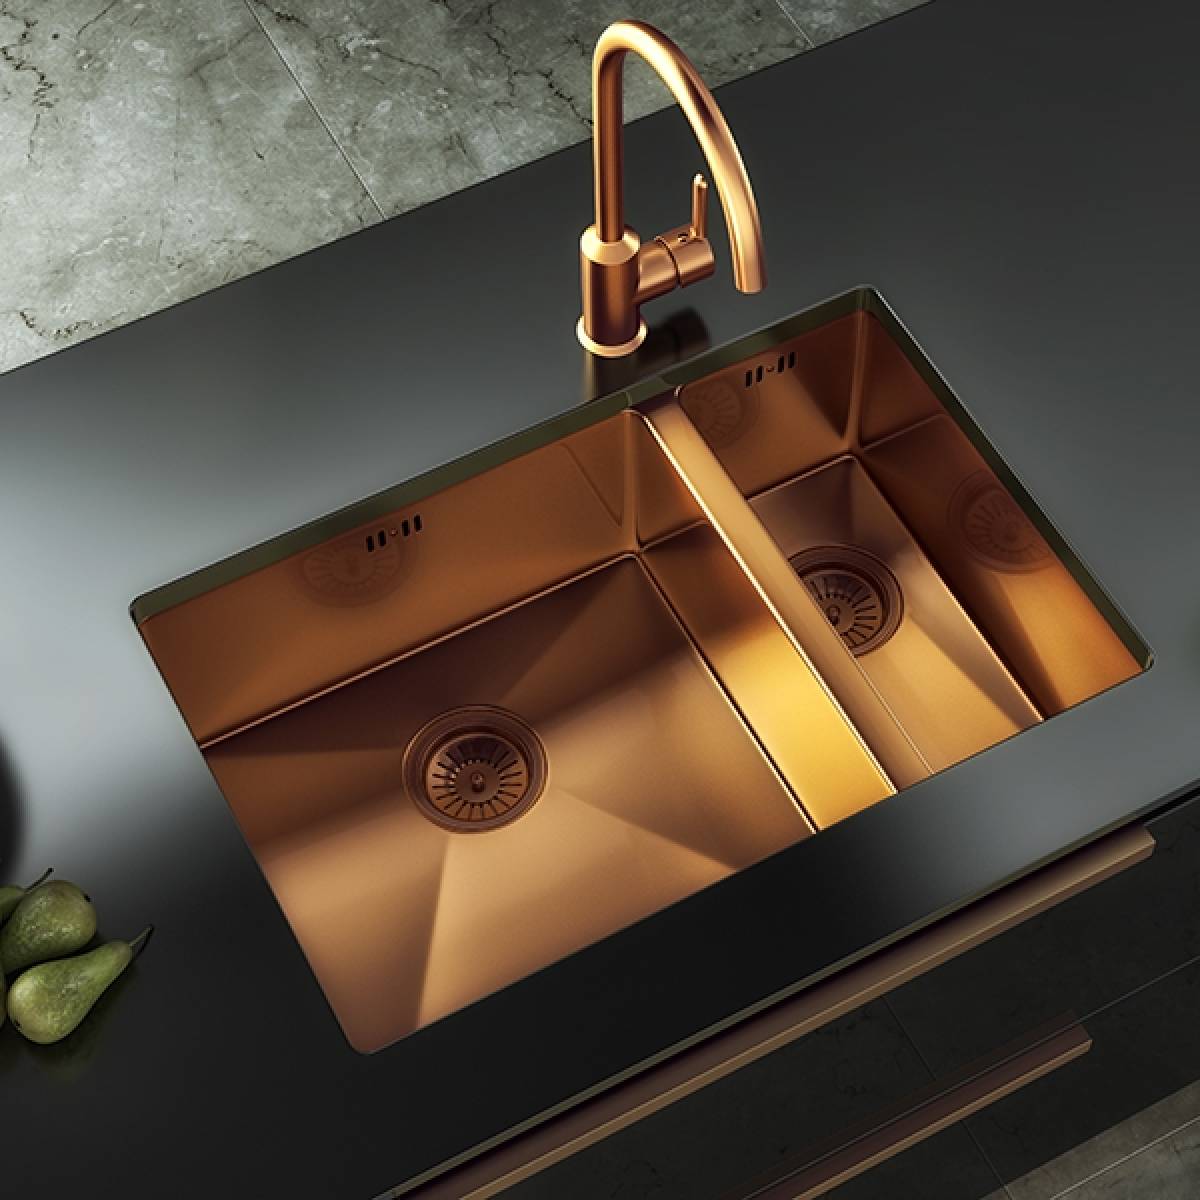 Elite 1.5 Bowl Inset or Undermounted Stainless Steel Kitchen Sink & Waste - Copper Finish (1472)